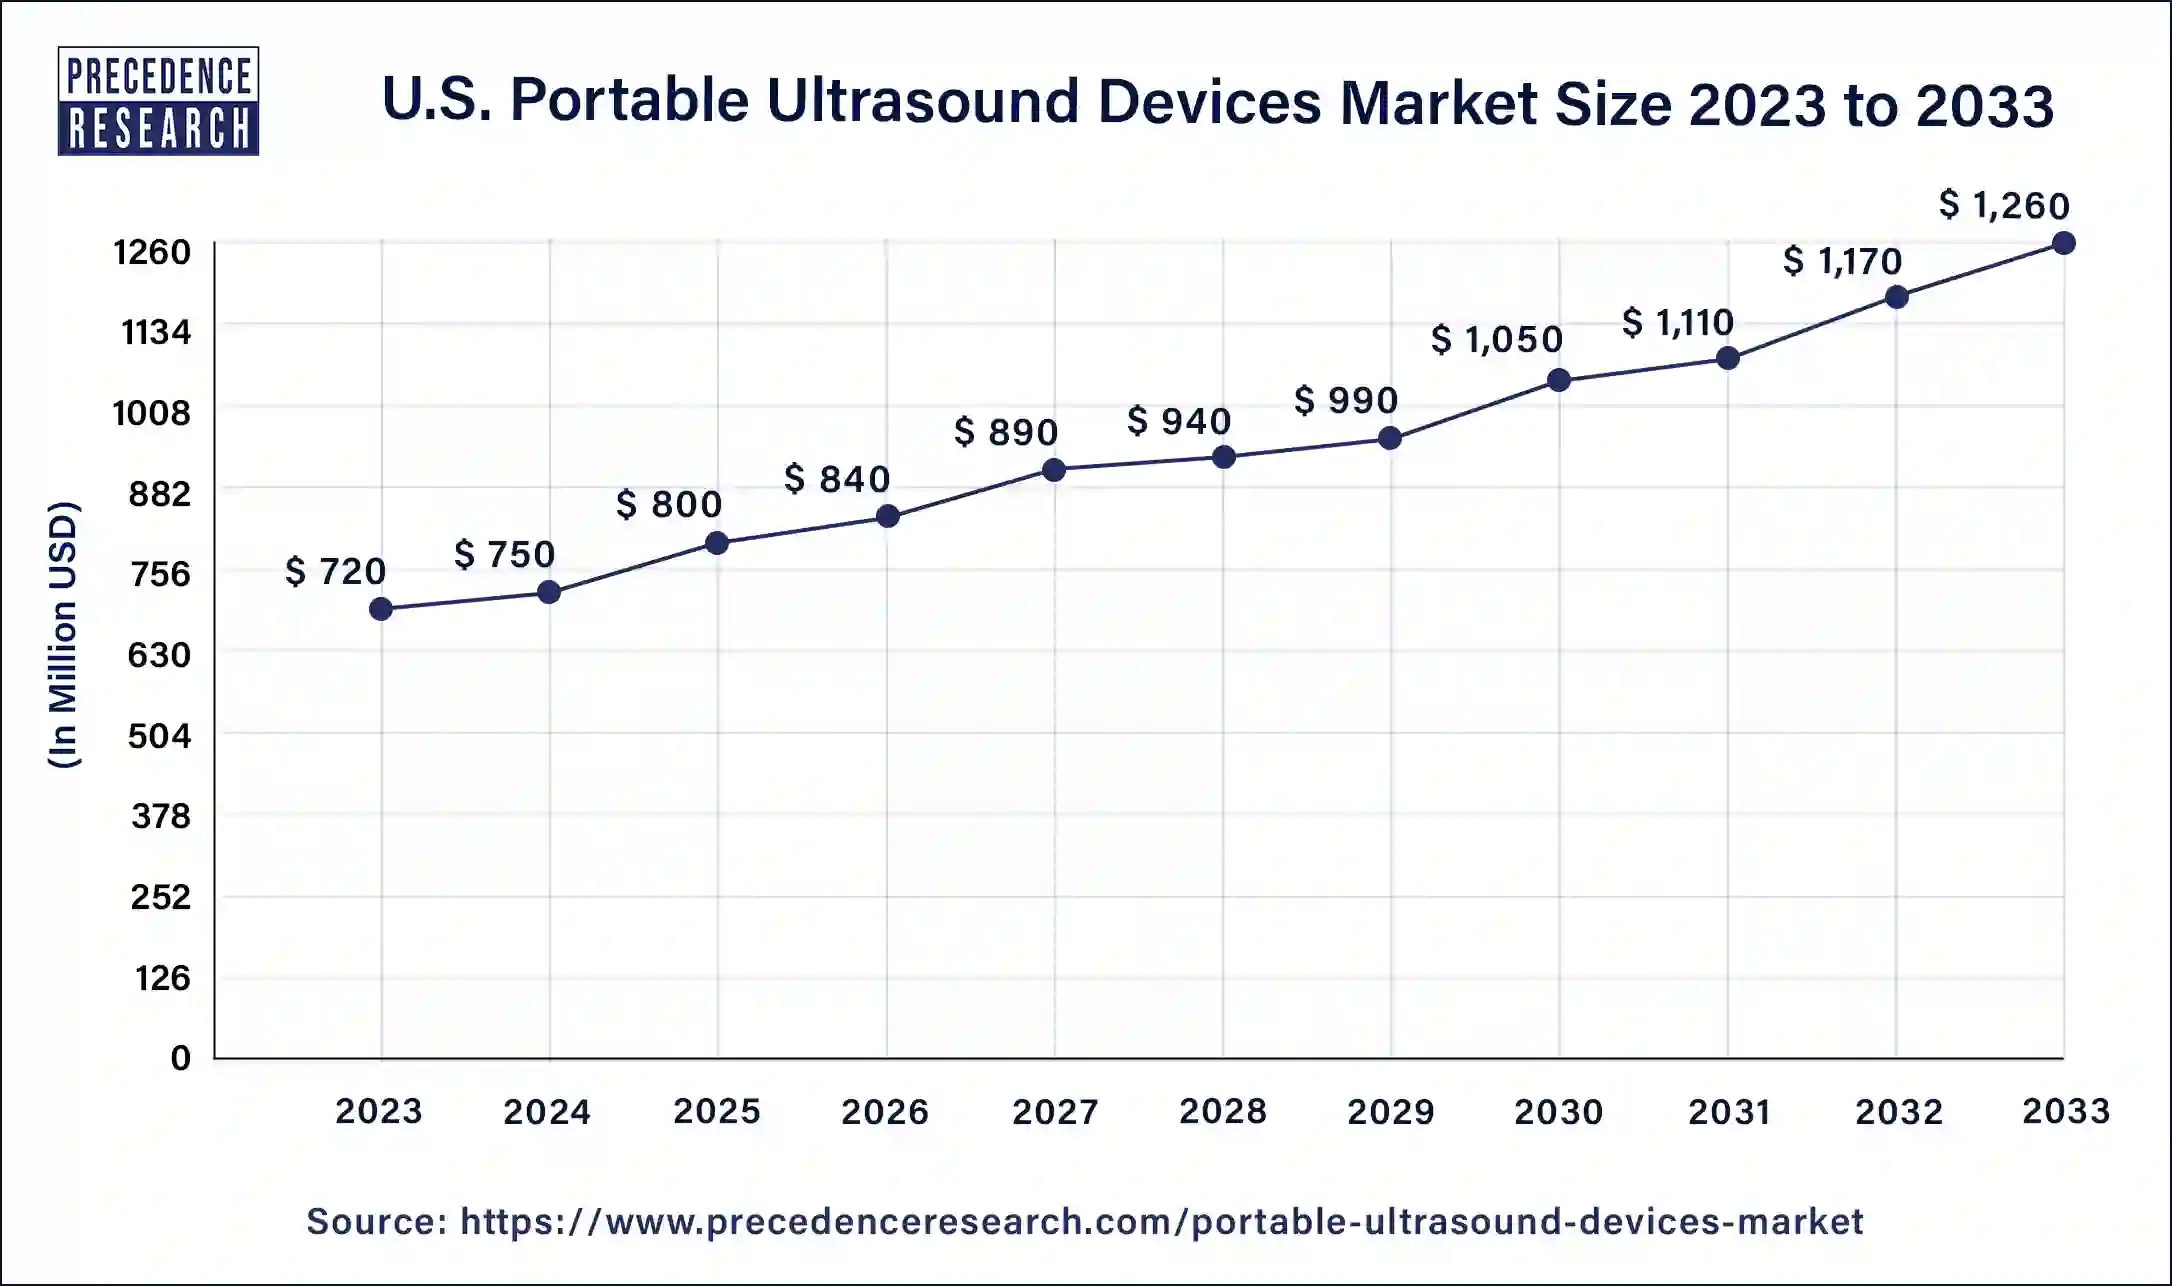 U.S. Portable Ultrasound Devices Market Size 2024 to 2033